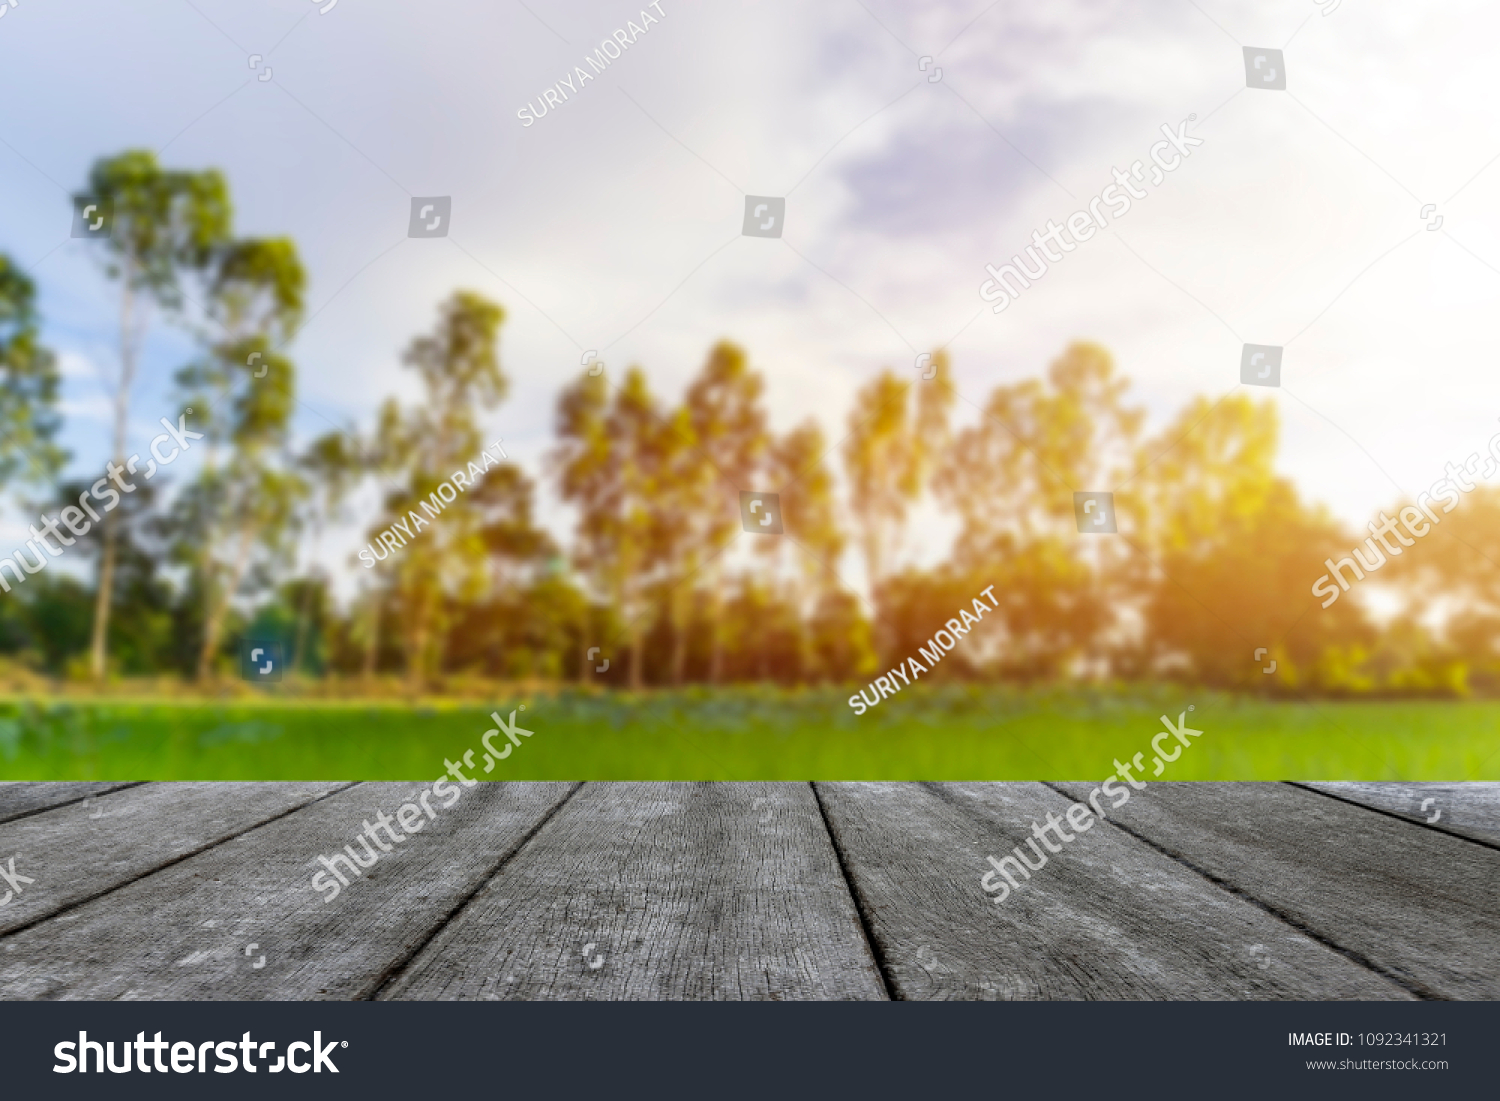 Wooden table blurred background of landscape with blue sky  #1092341321